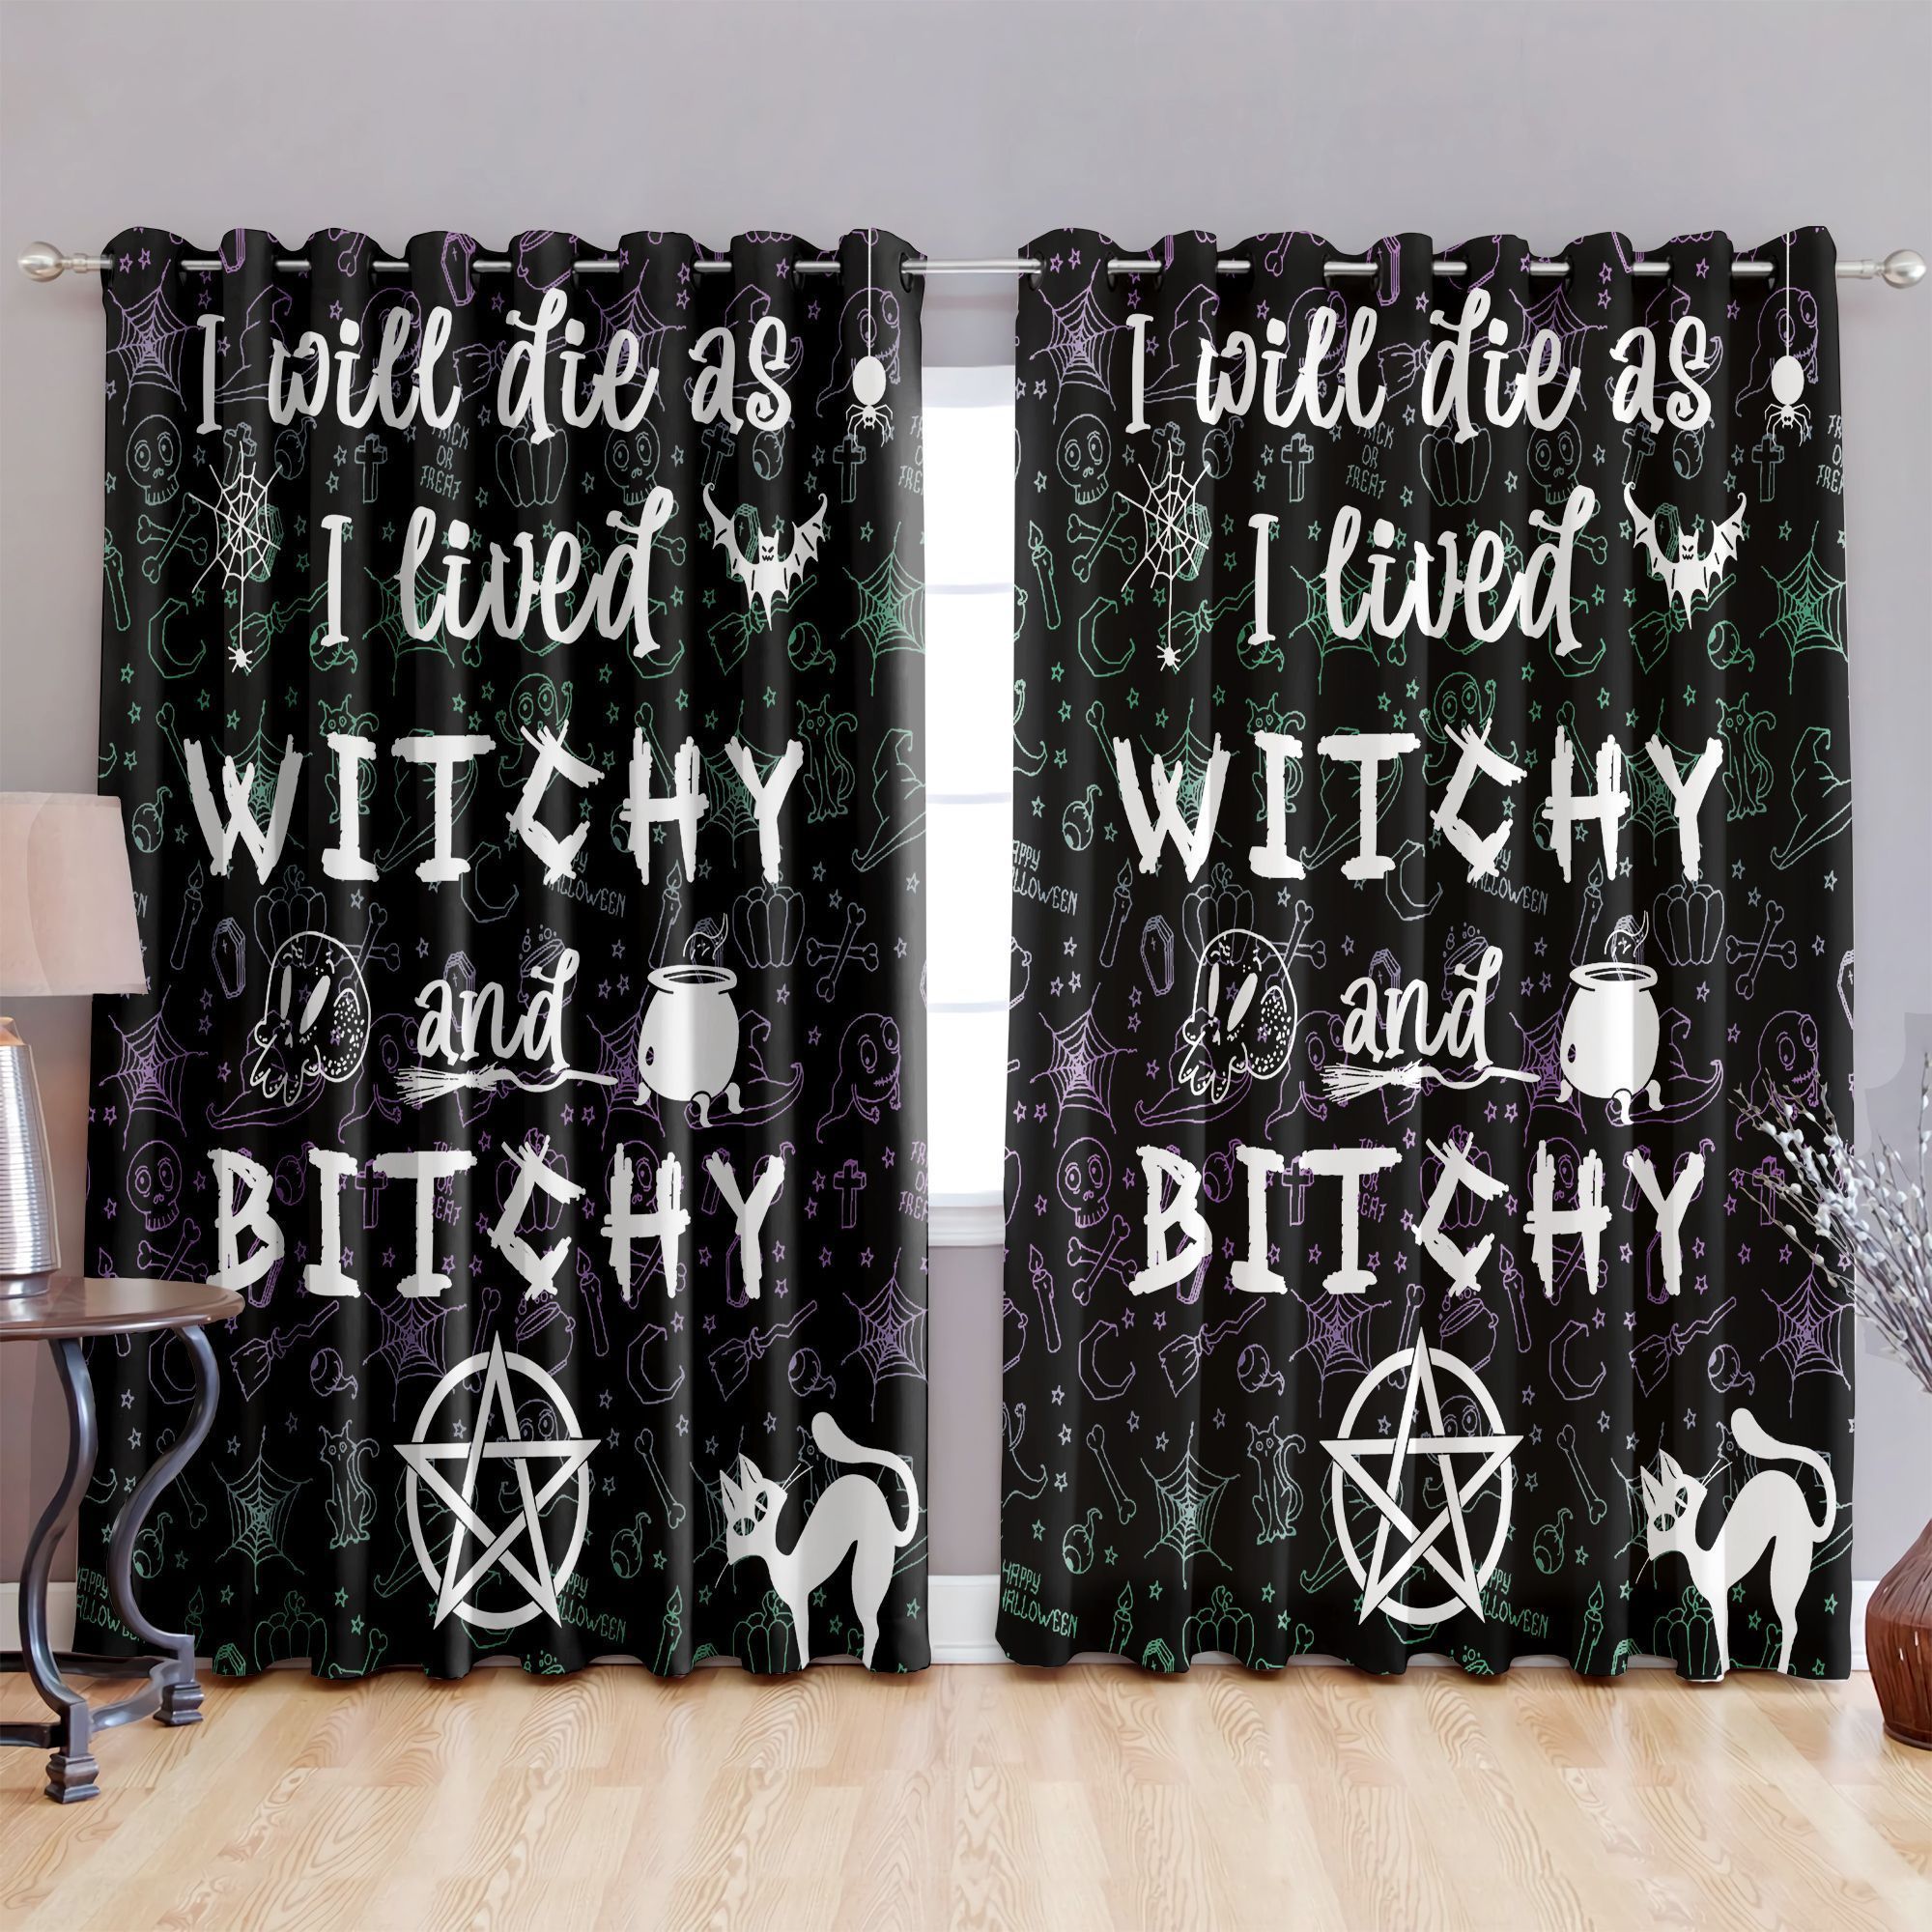 I Will Die I Lived Witchy And Bitchy Printed Window Curtains Home Decor